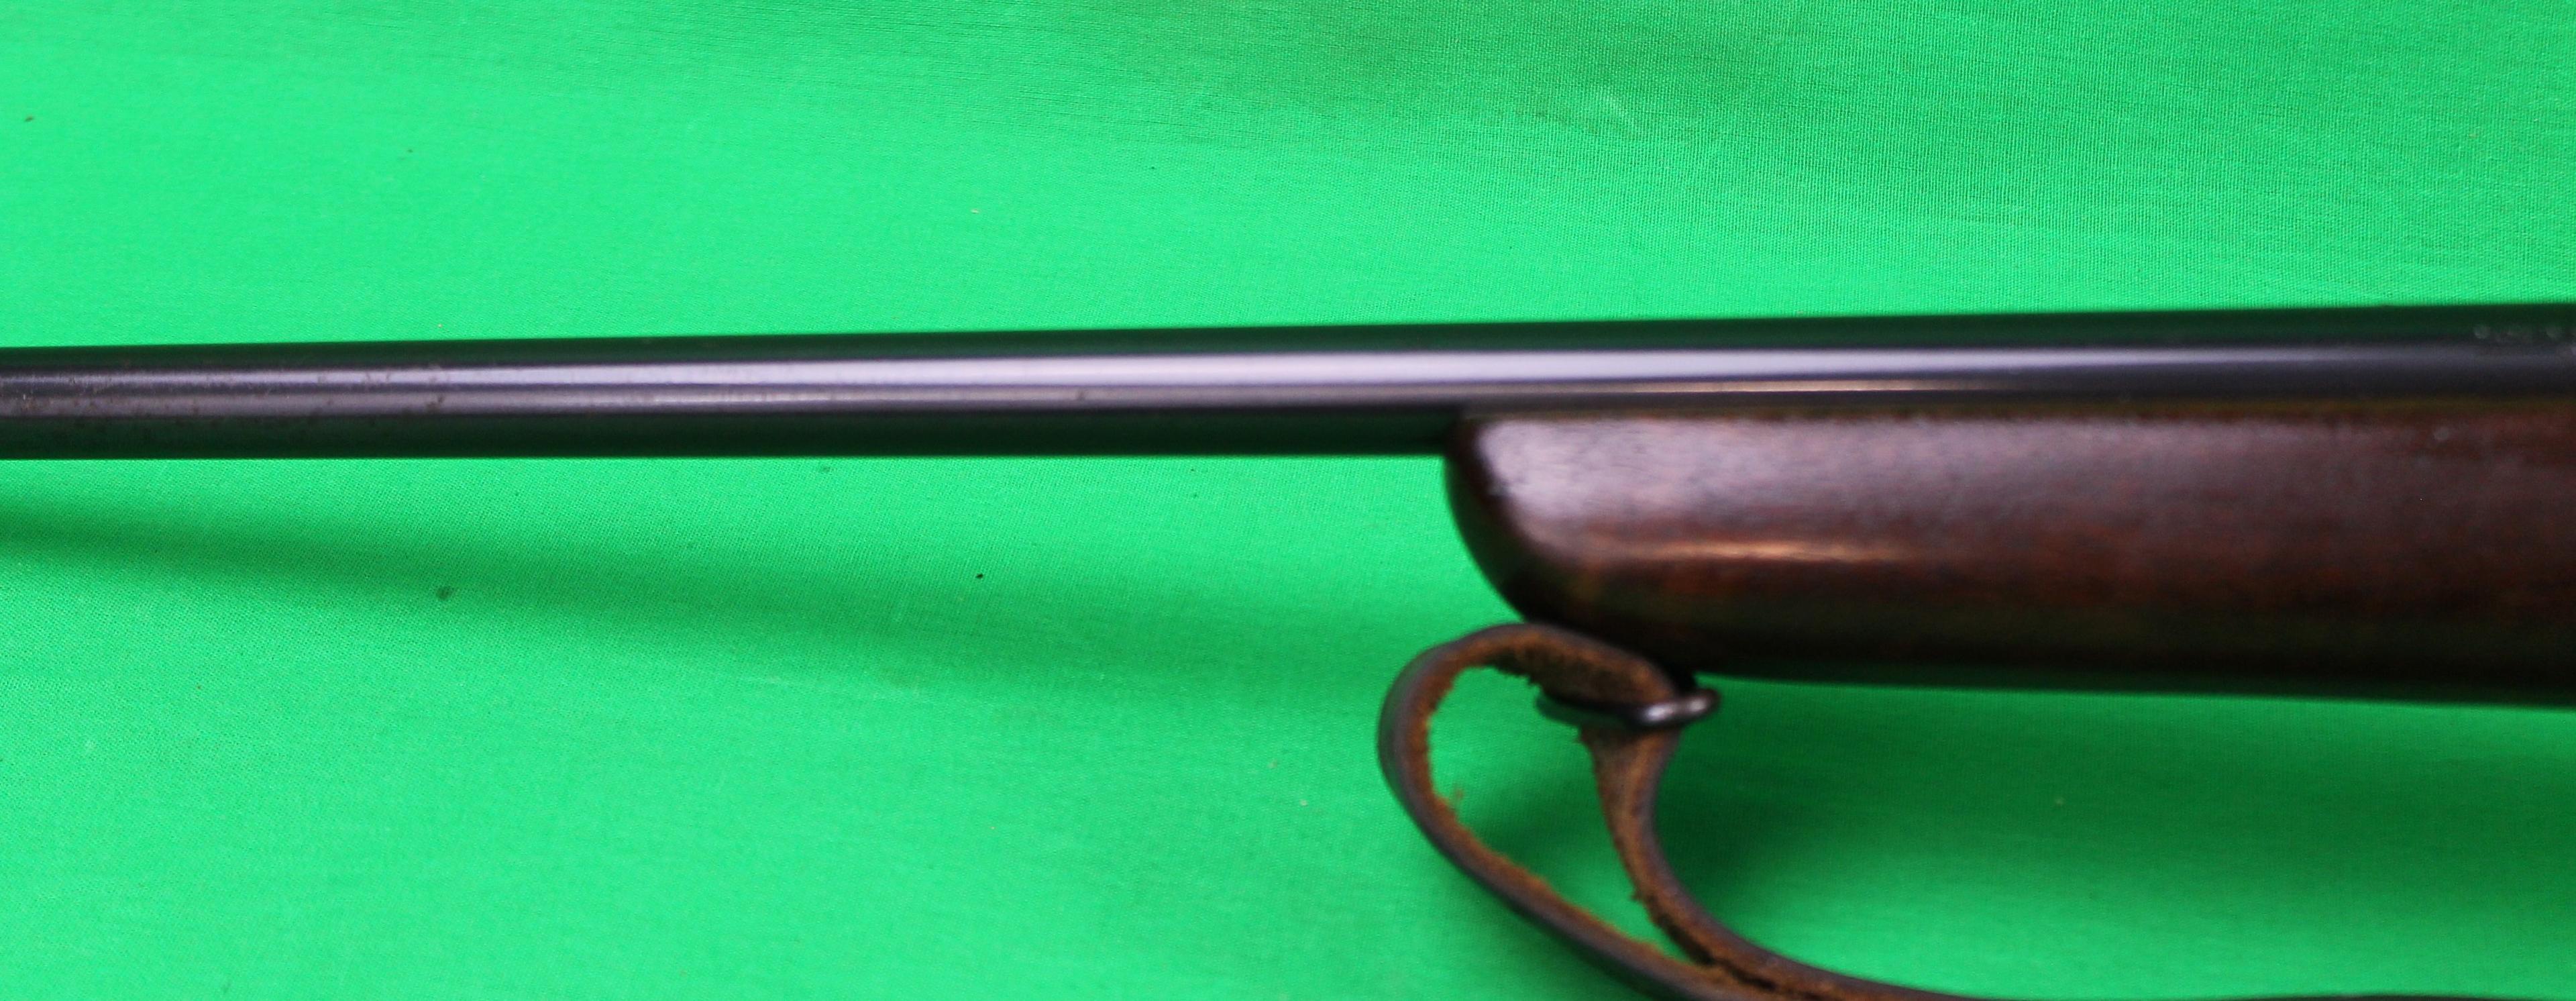 Winchester 43 218 Bee With weaver J4 Scope